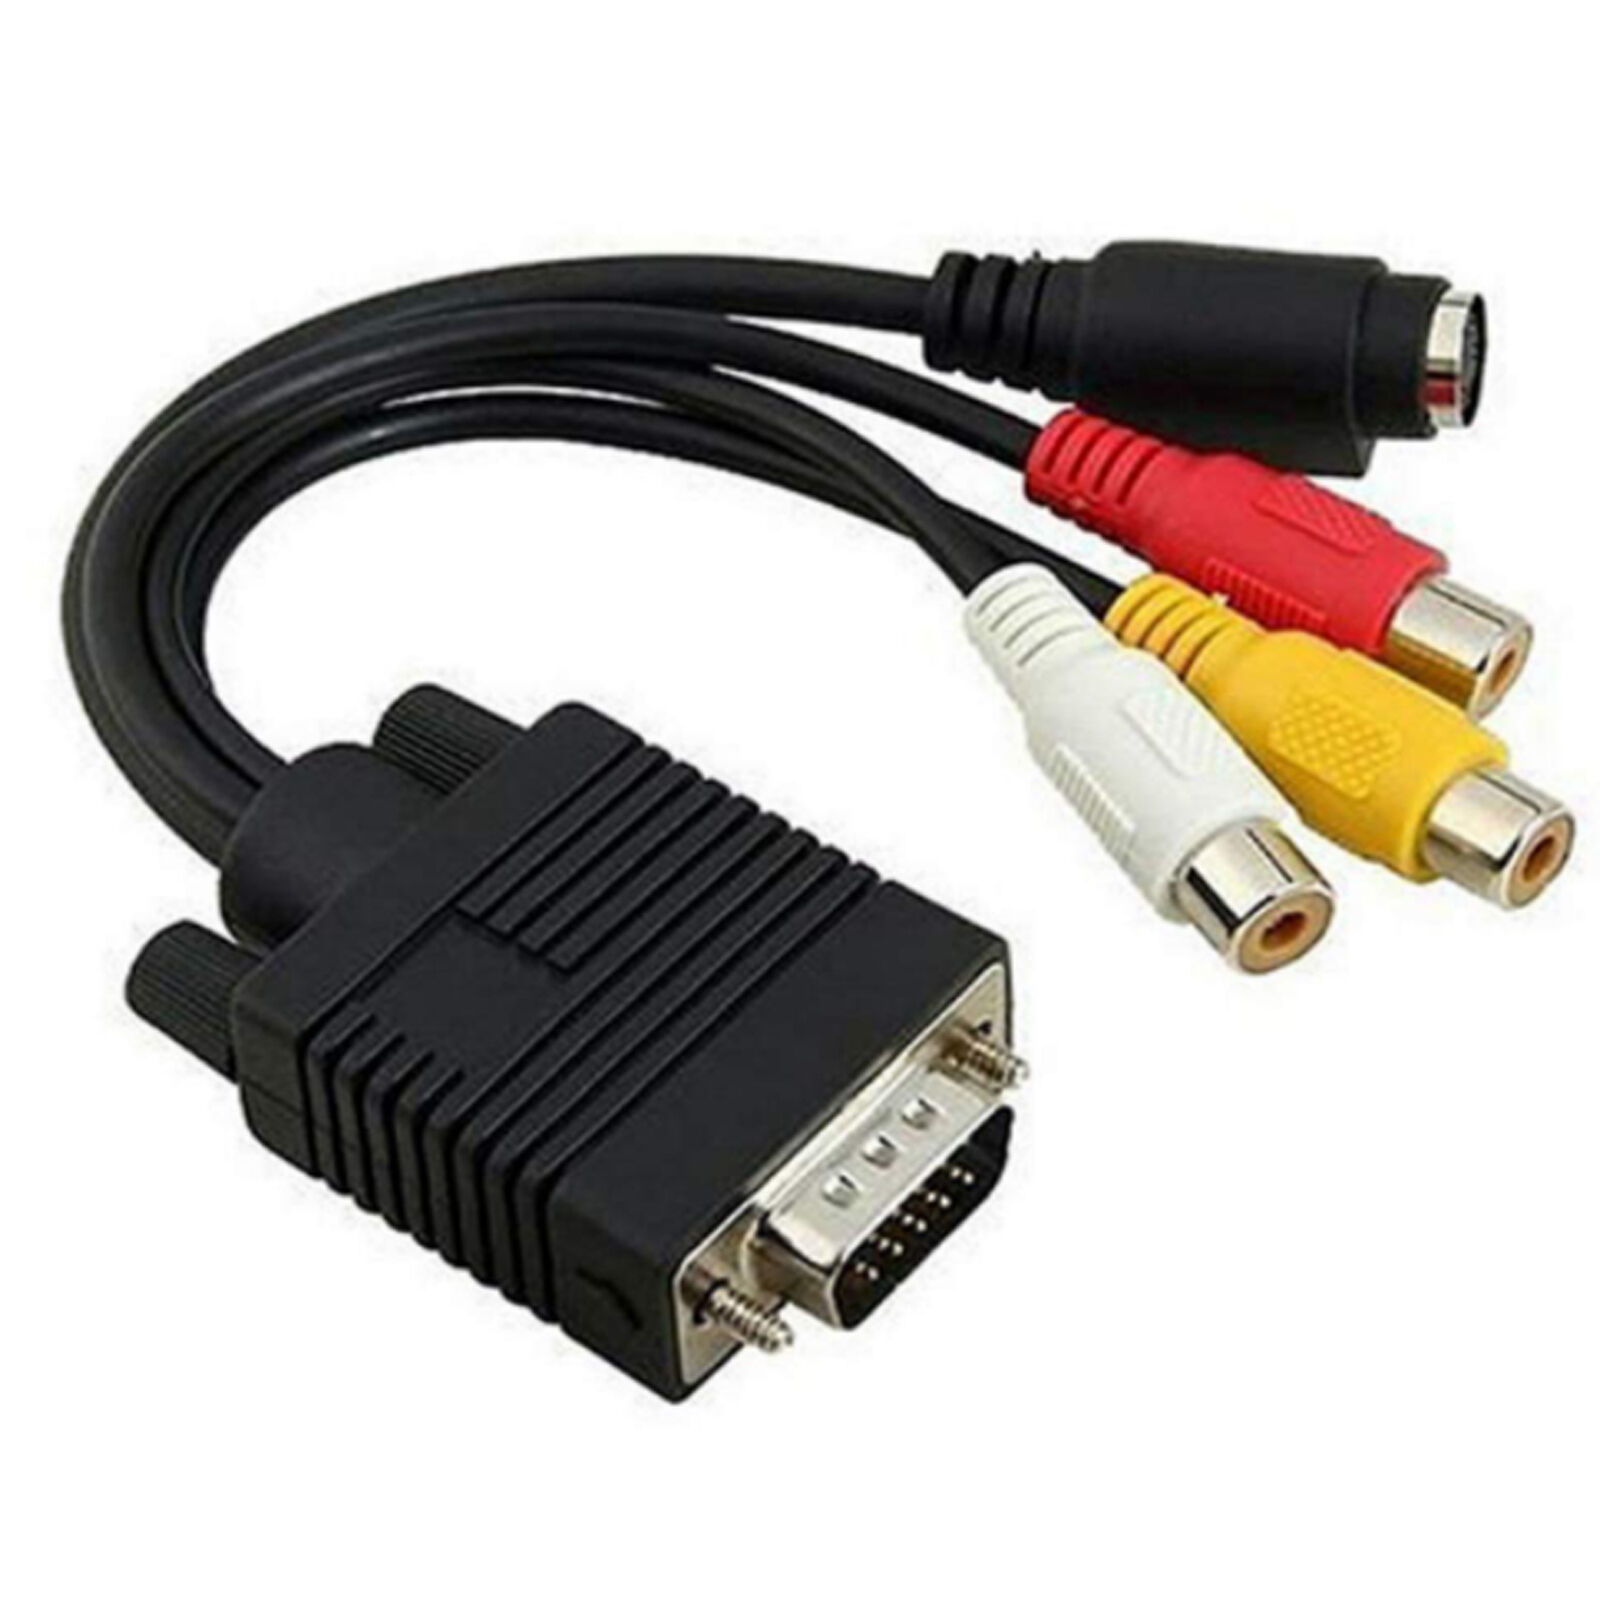 VGA SVGA to S-Video 3 RCA Composite AV TV Out Adapter Converter Cable